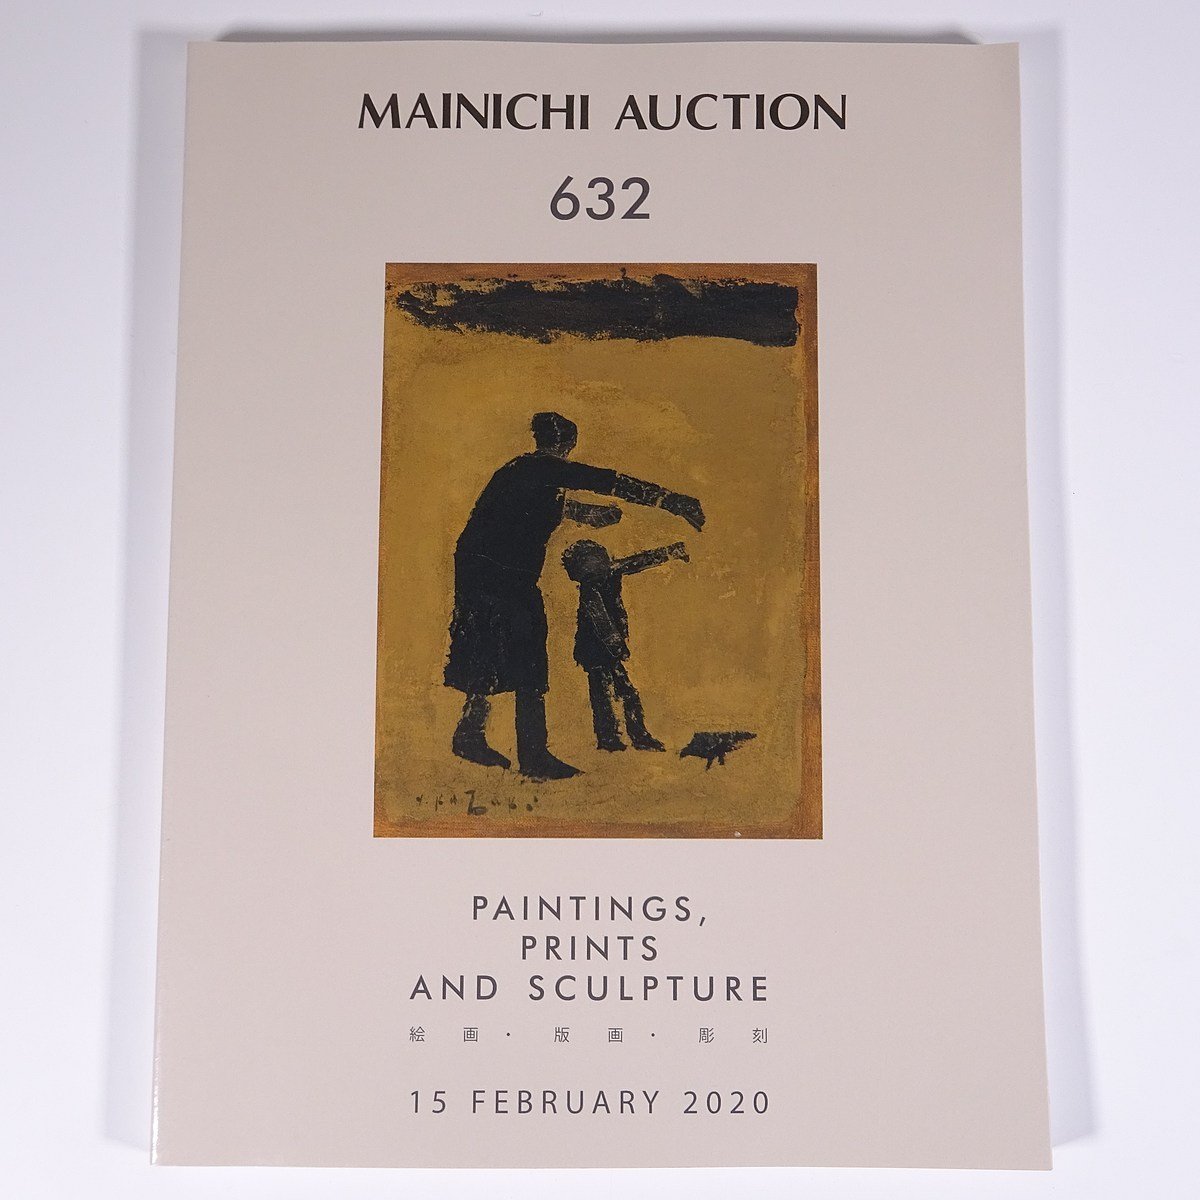 MAINICHI AUCTION 632 Paintings, Prints, and Sculptures 2020/2/15 Mainichi Auction Large Books Auction Catalog Catalog Art Fine Art, Painting, Art Book, Collection, Catalog